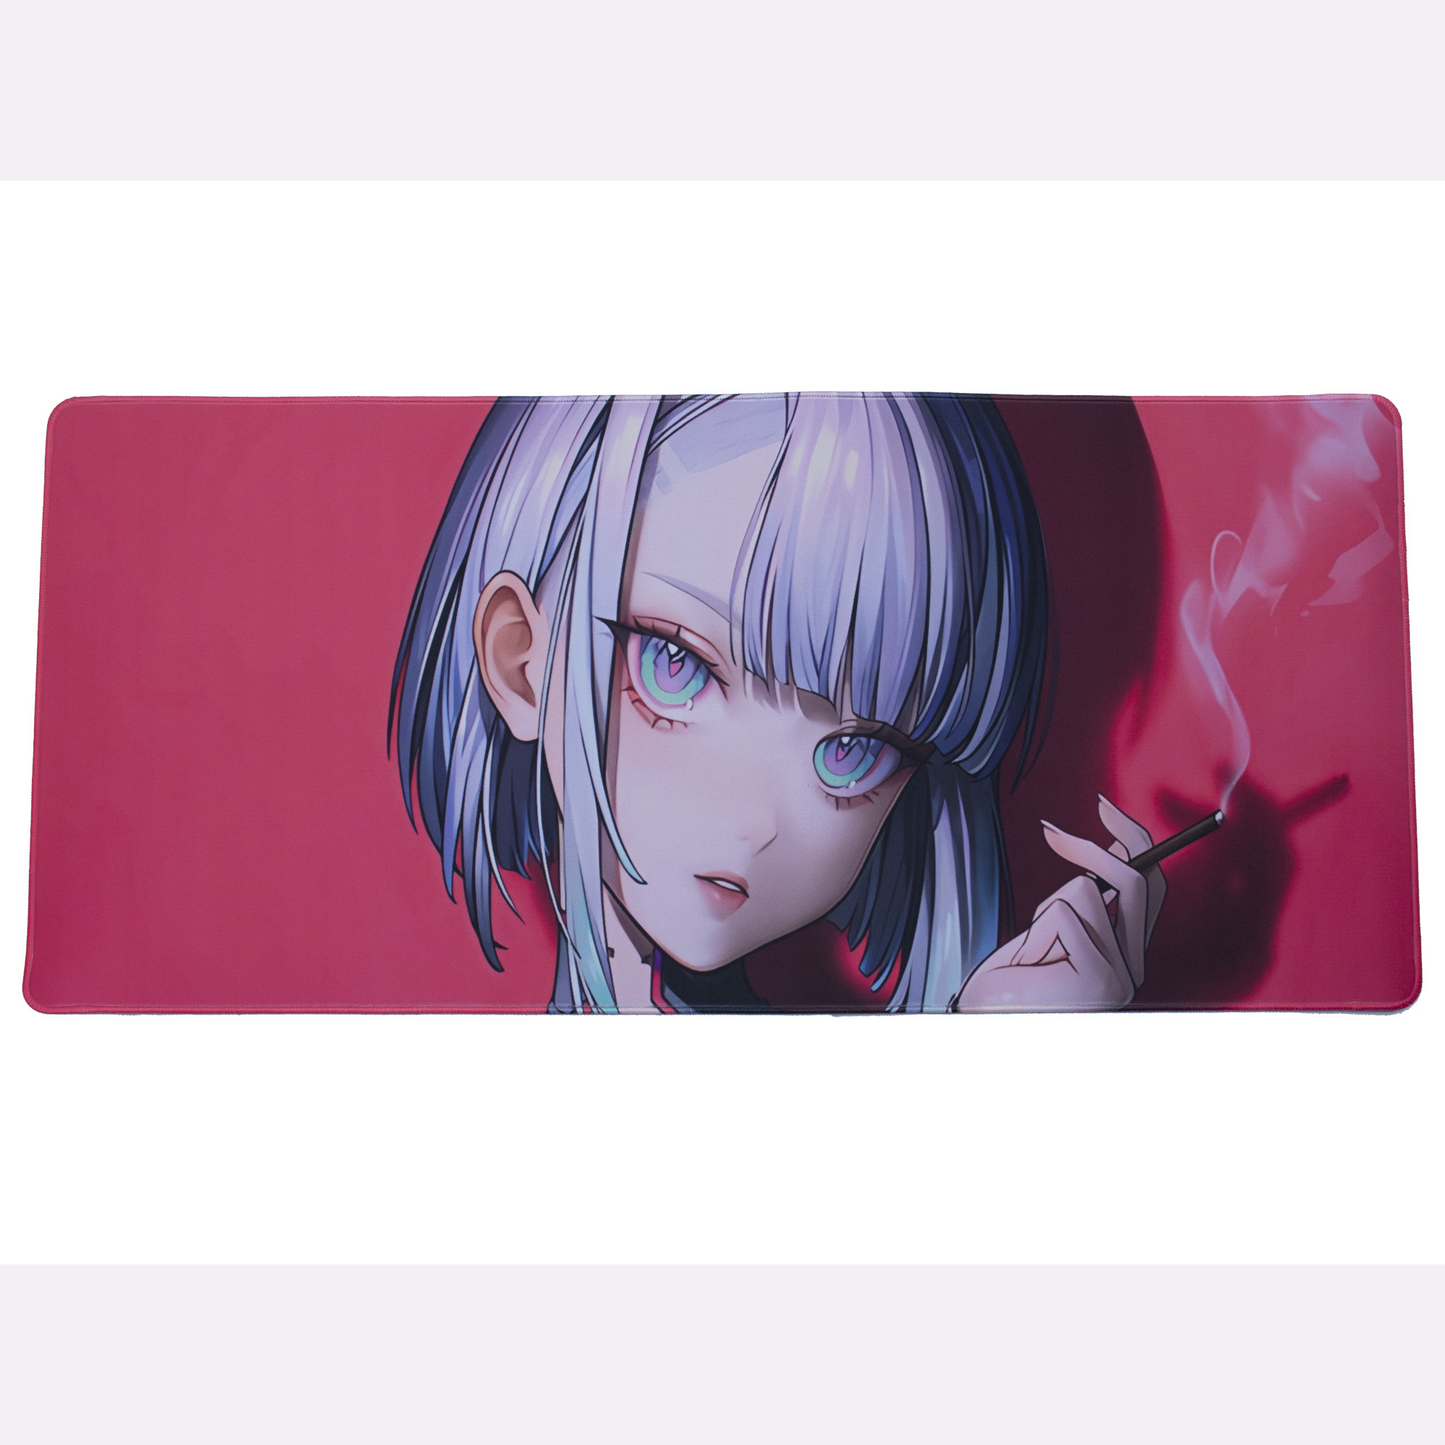 Colorful Print XL Mouse Pad